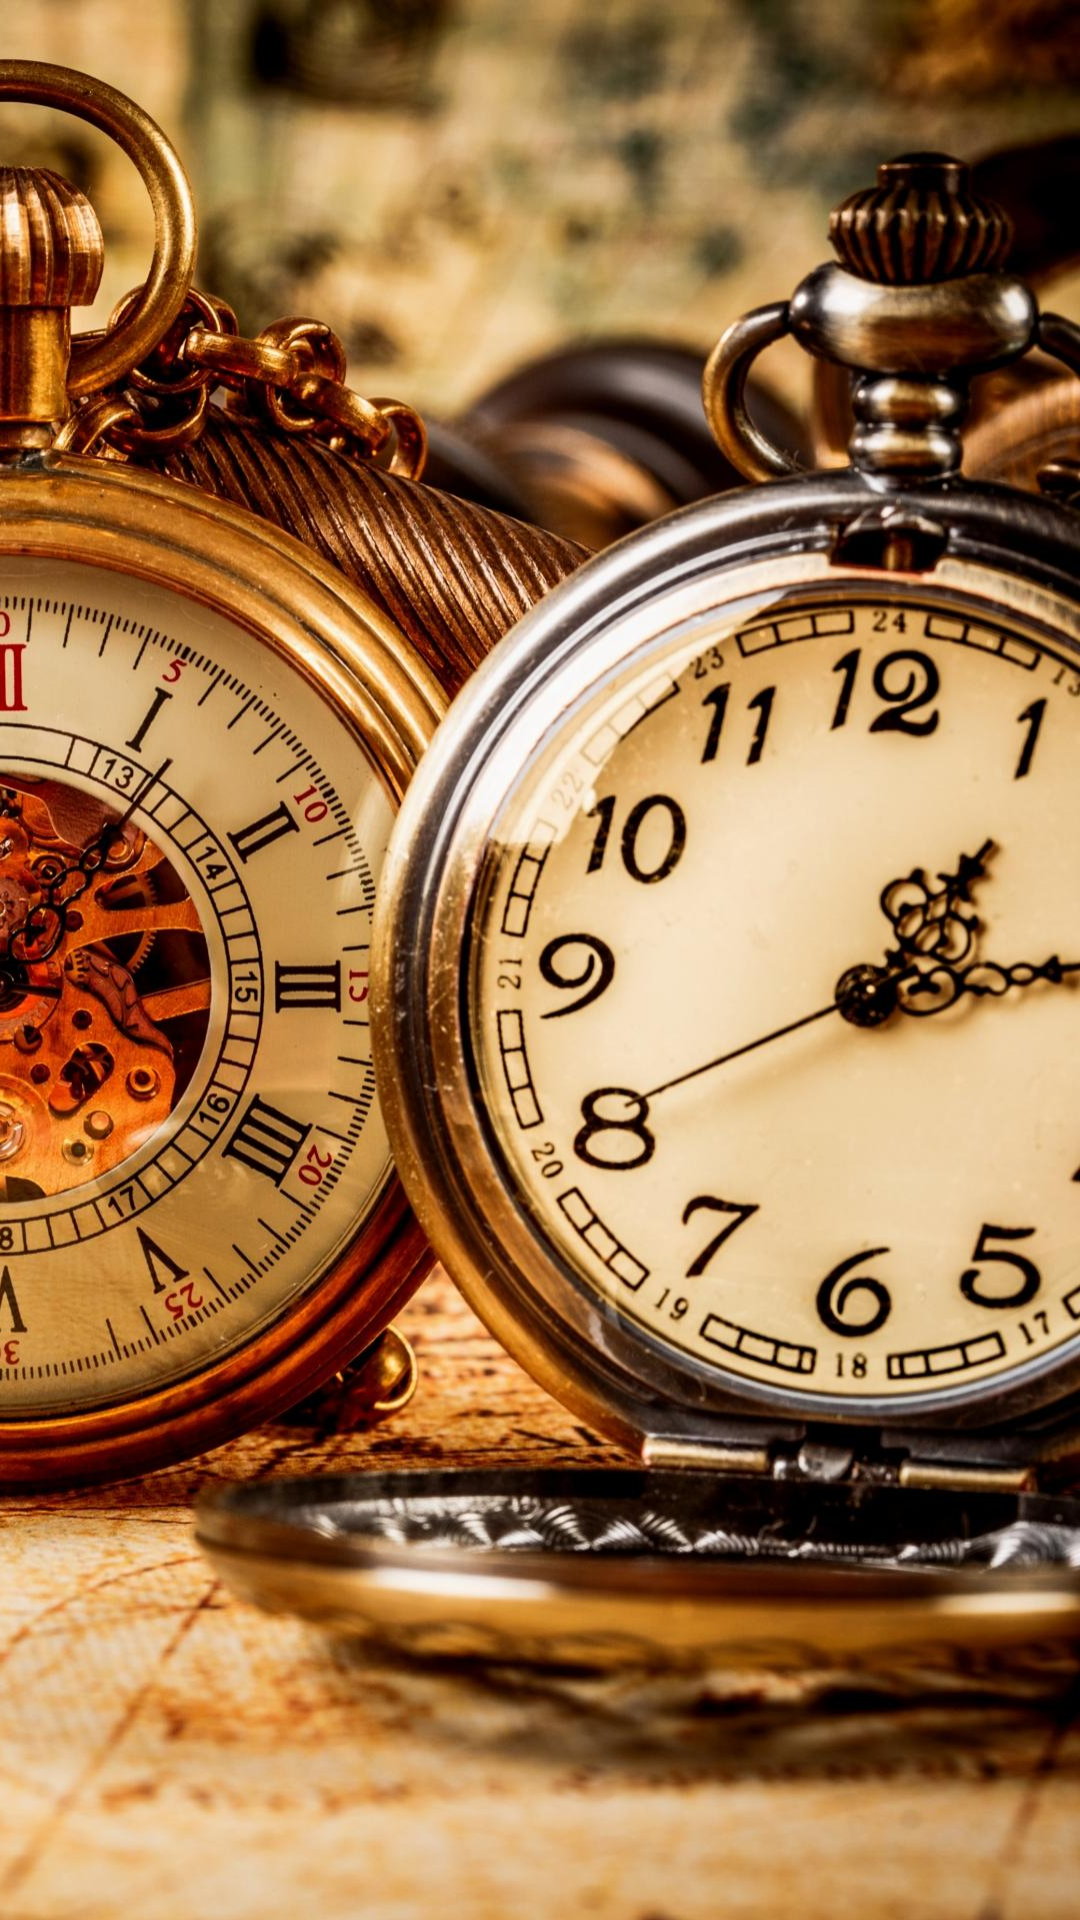 Old Watches Galaxy S5 Wallpaper Vintage Clock